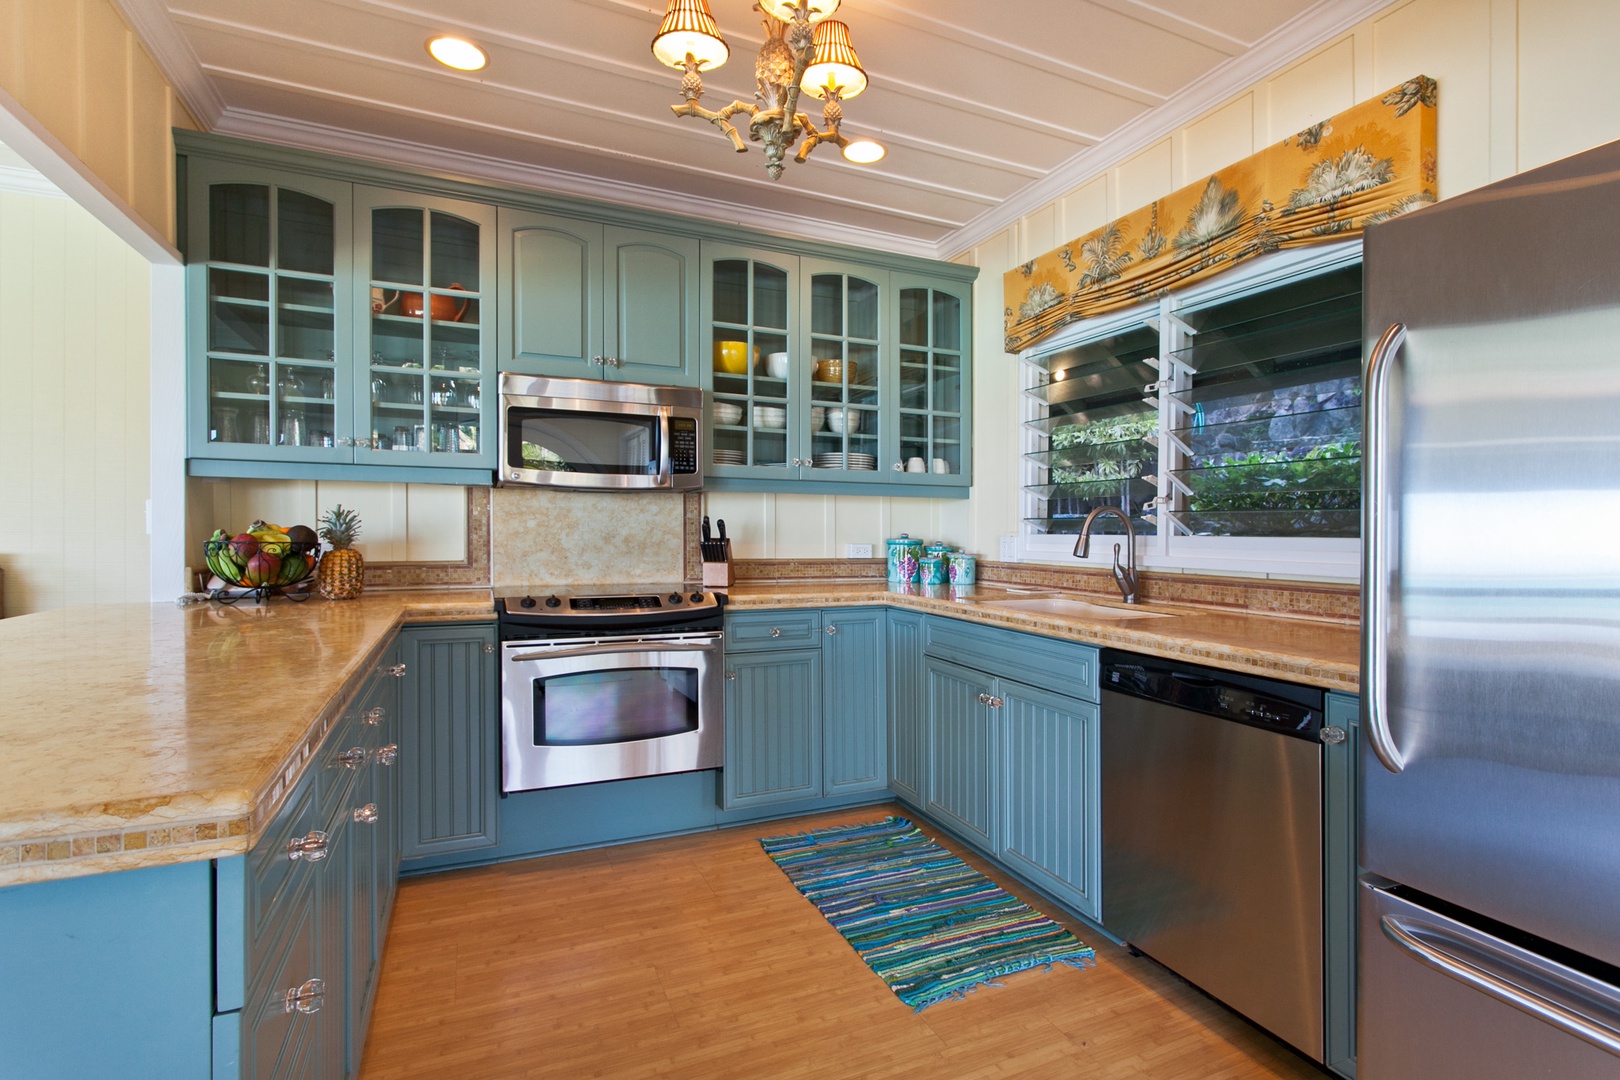 Kailua Vacation Rentals, Hale Kainalu* - The well-appointed kitchen makes for an enjoyable space to prepare a meal.